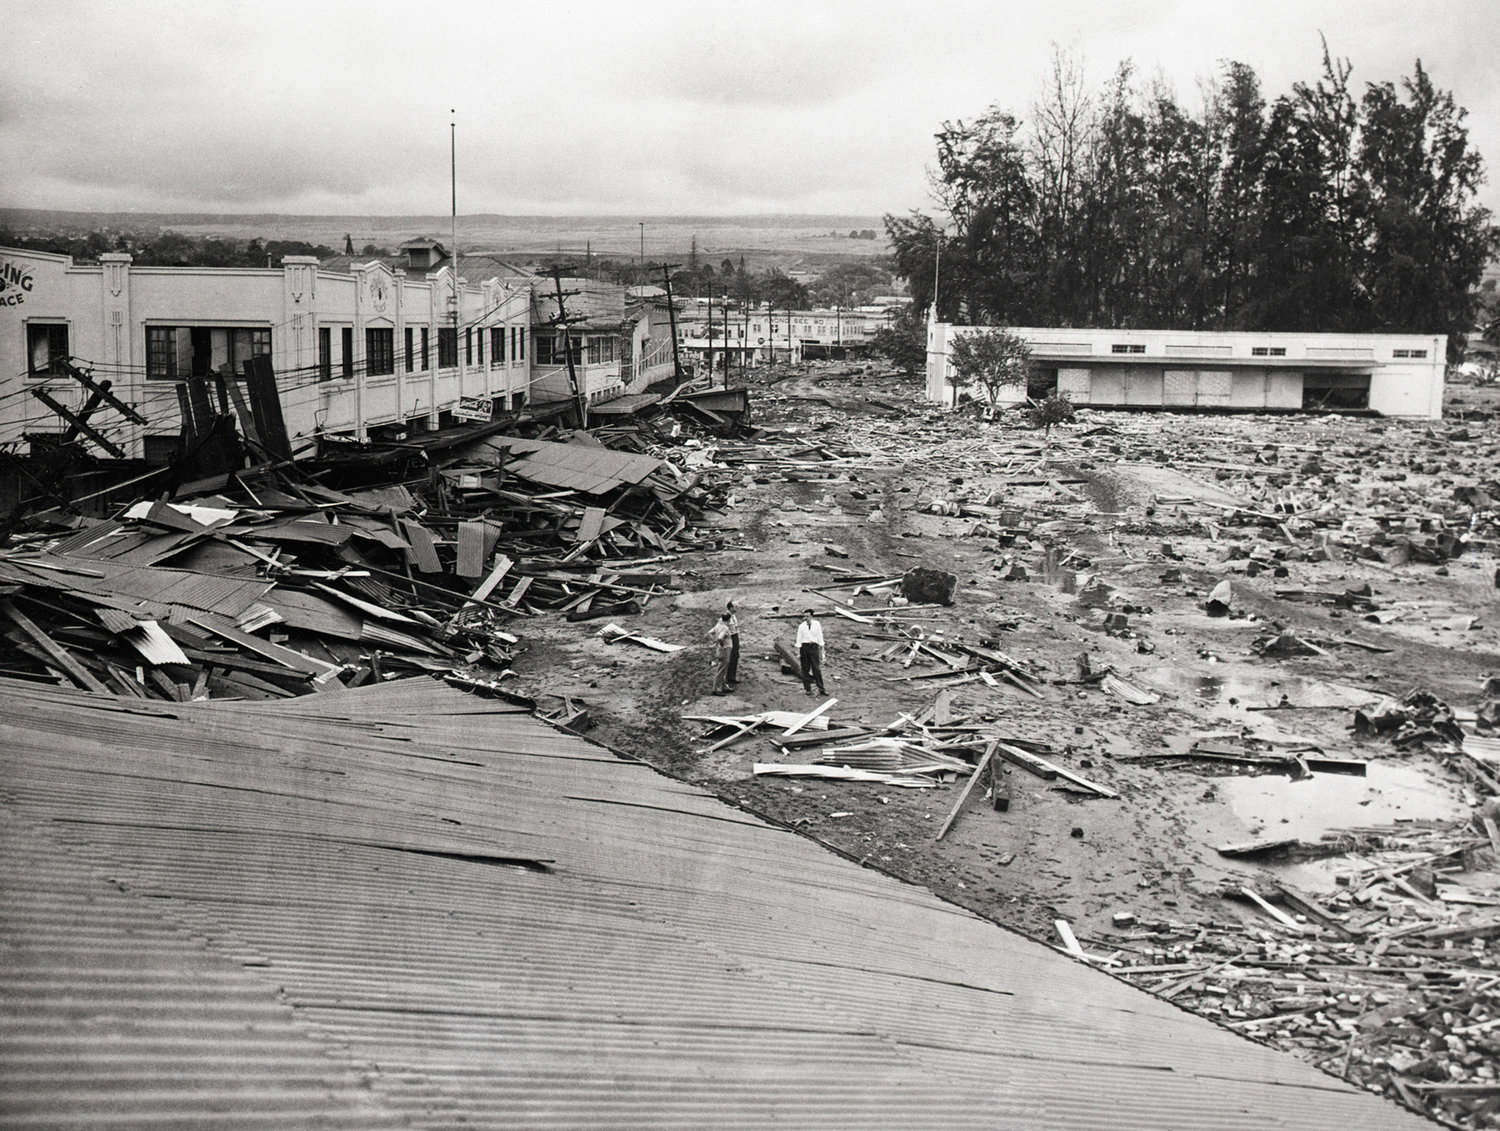 Part of the main street in Hilo, Hawaii, was flattened by a tsunami in April 1946. That big wave was triggered by a quake near the Aleutian Islands, where the edges of two tectonic plates continue to collide.